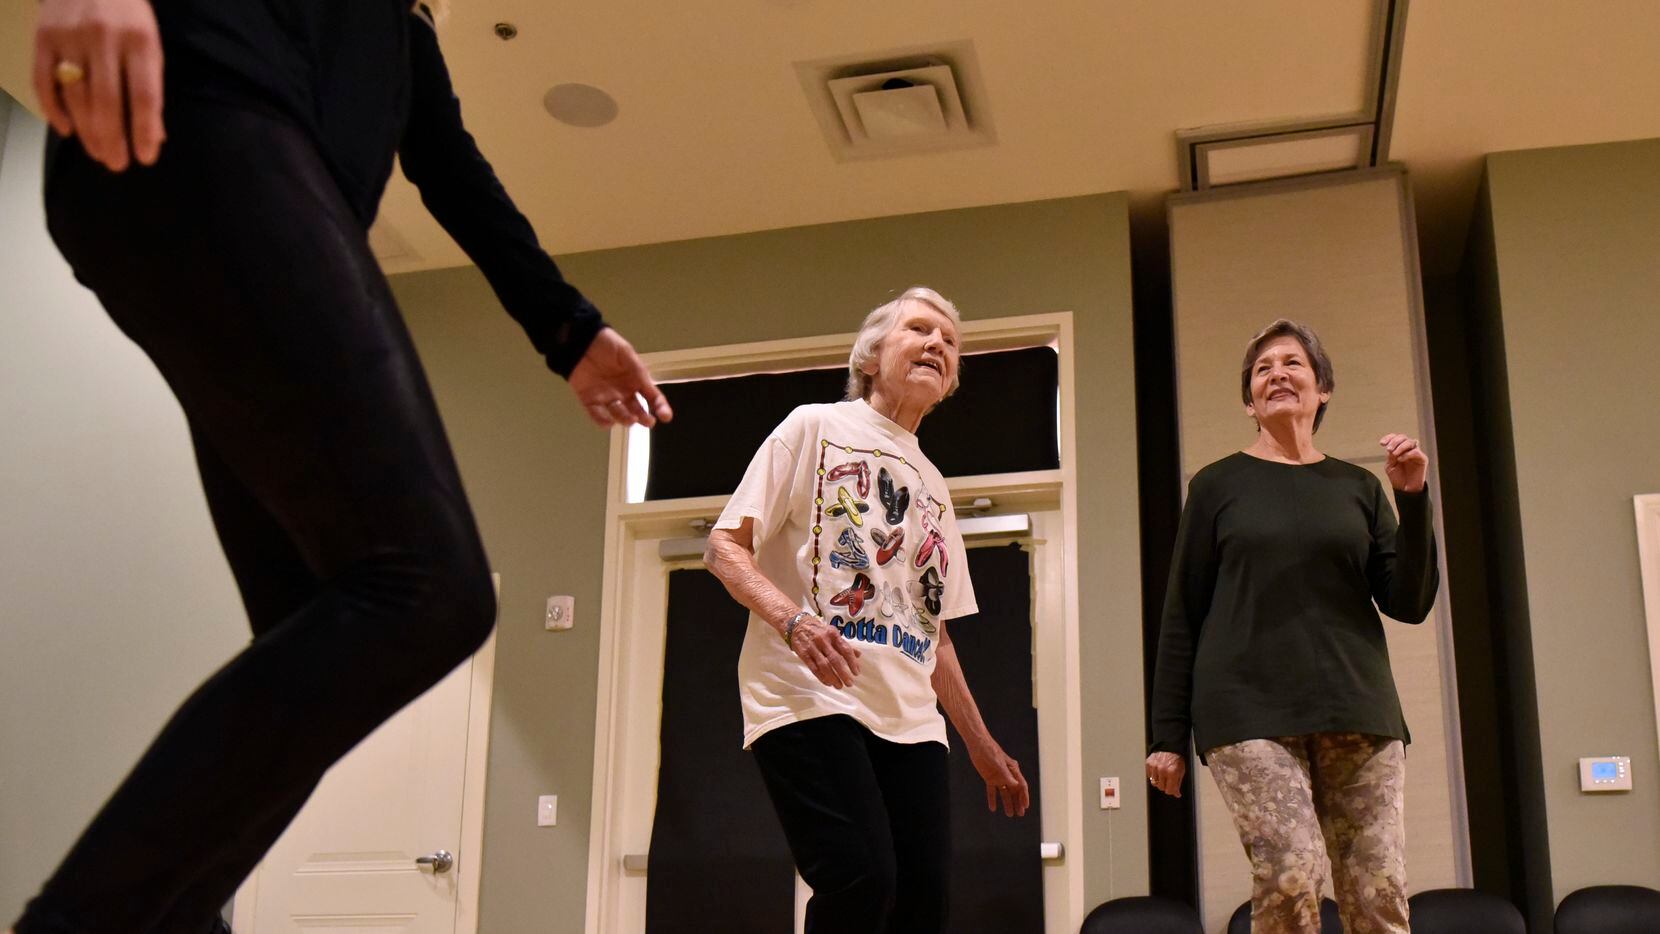 Coila Stevens (left) and Pam Spell, 77, sway to the music during a dance class with other seniors at Presbyterian Village North in Dallas.